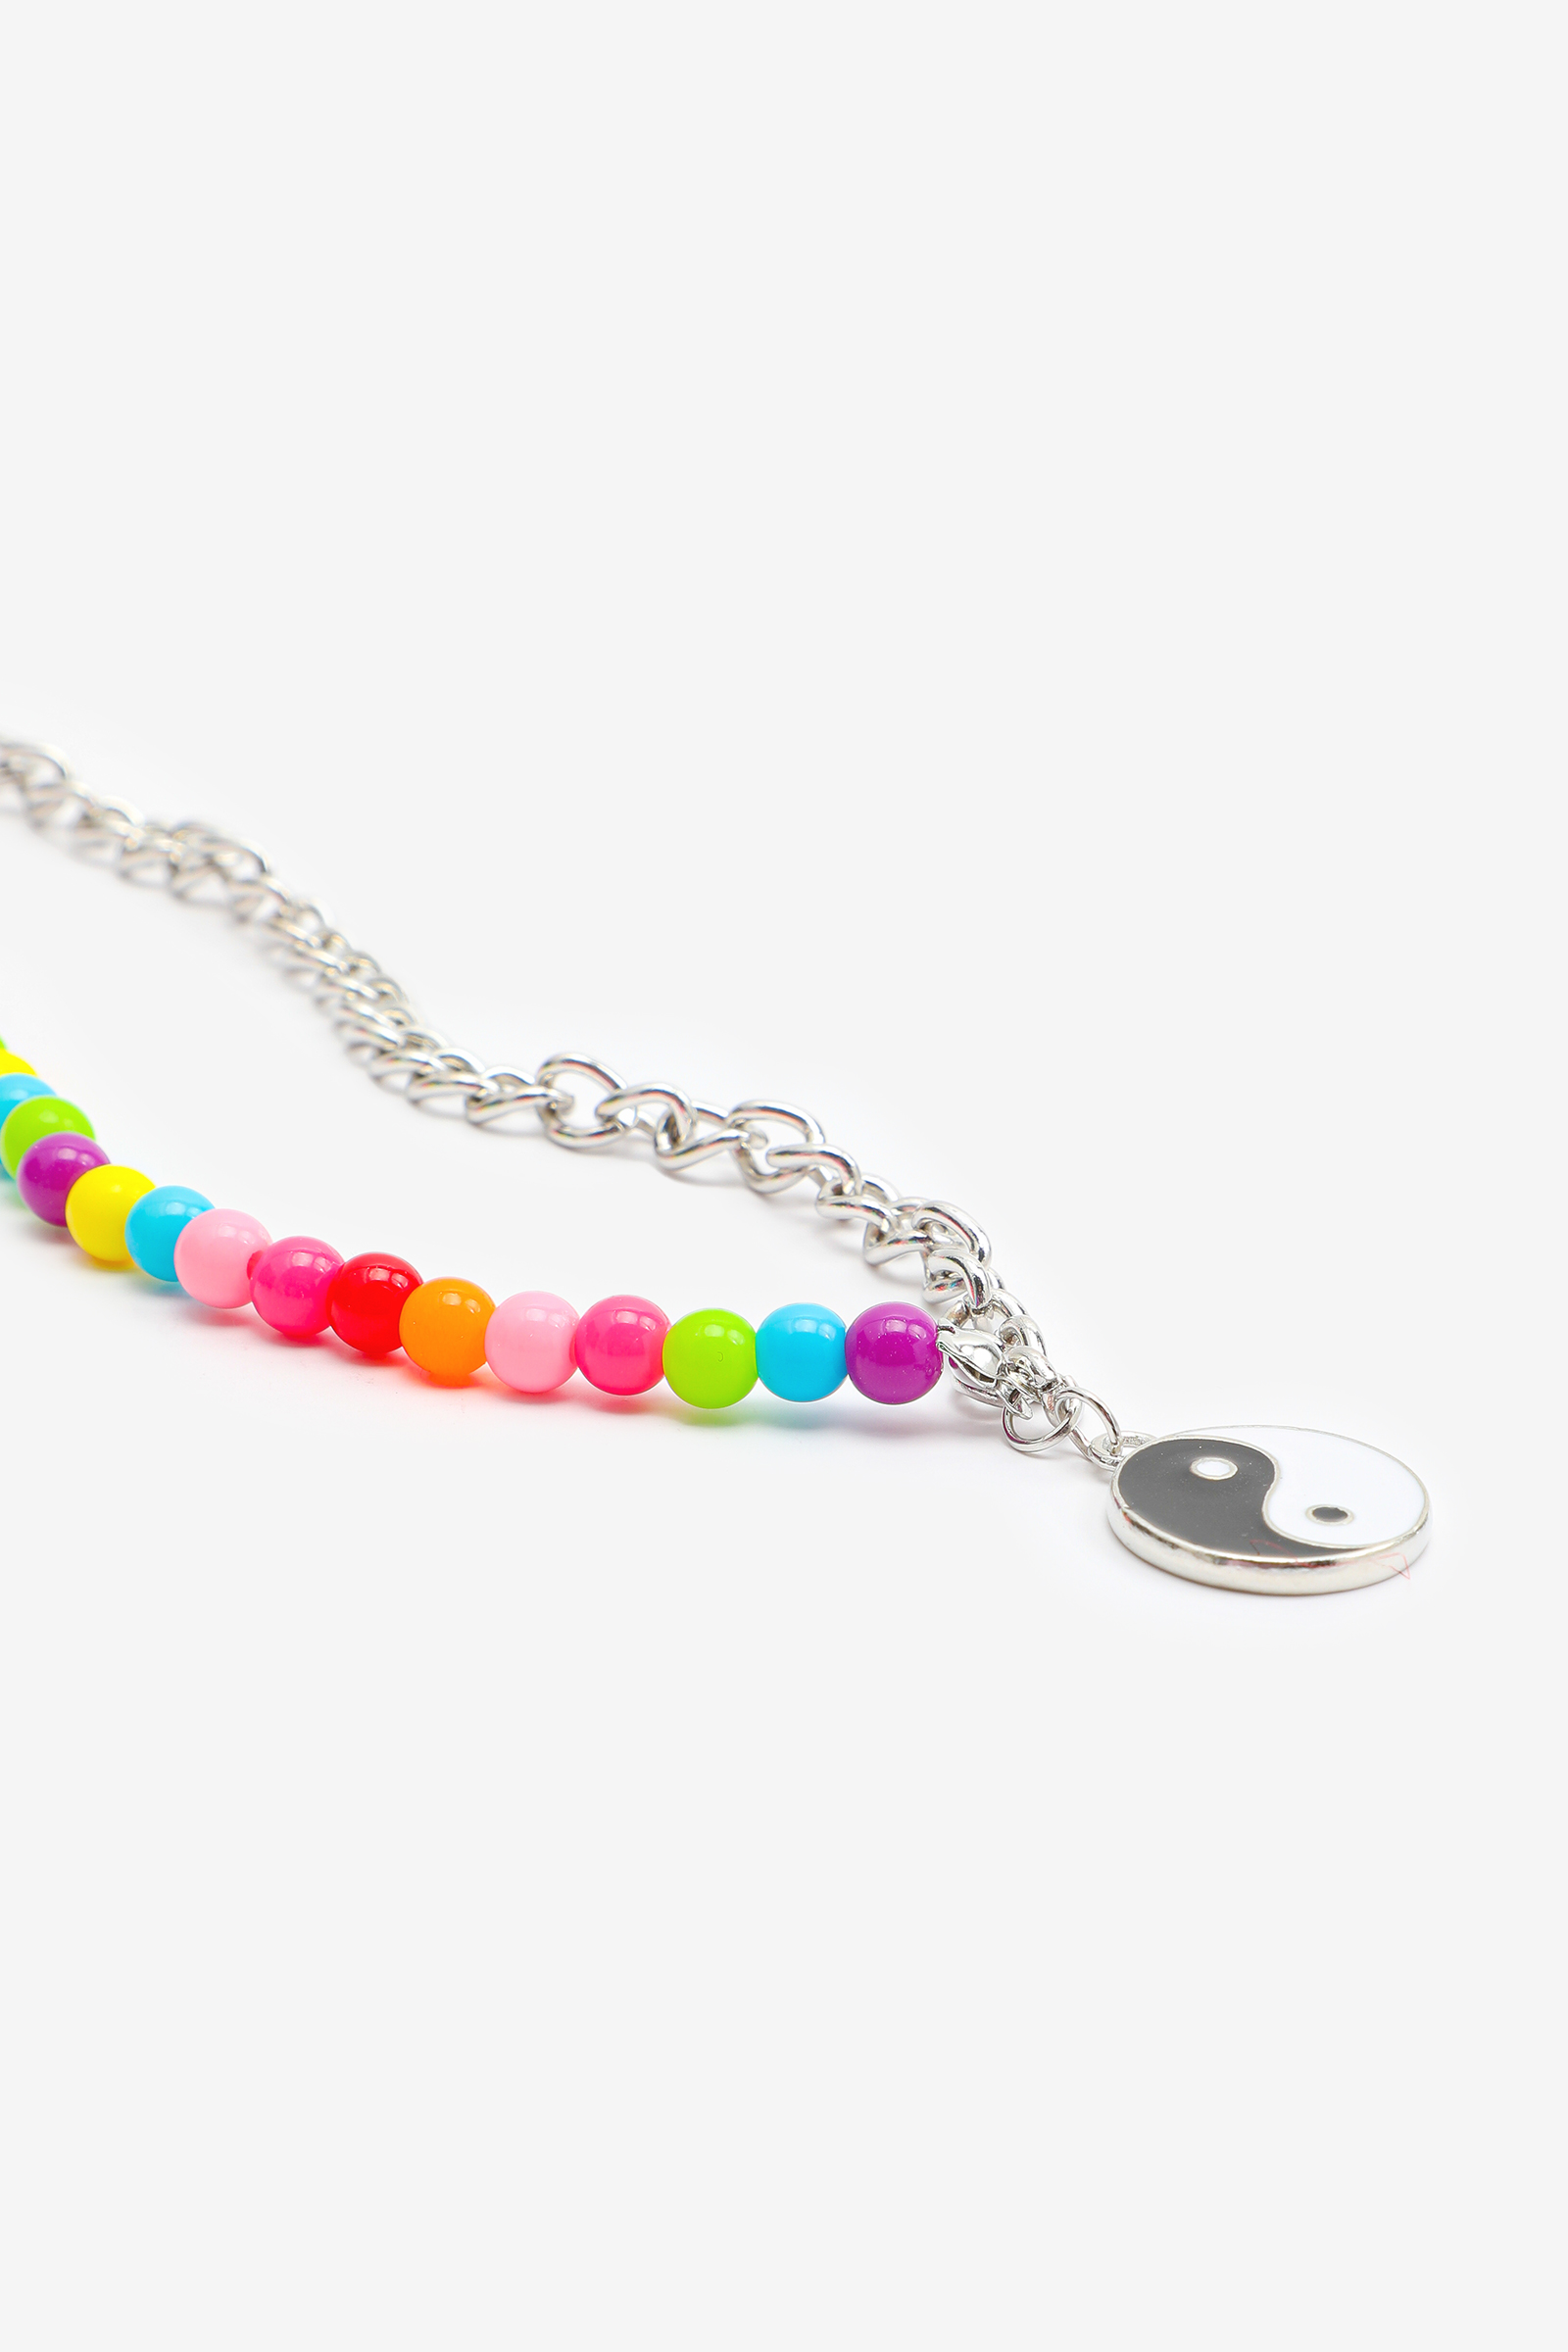 Beaded Necklace with Yin & Yang